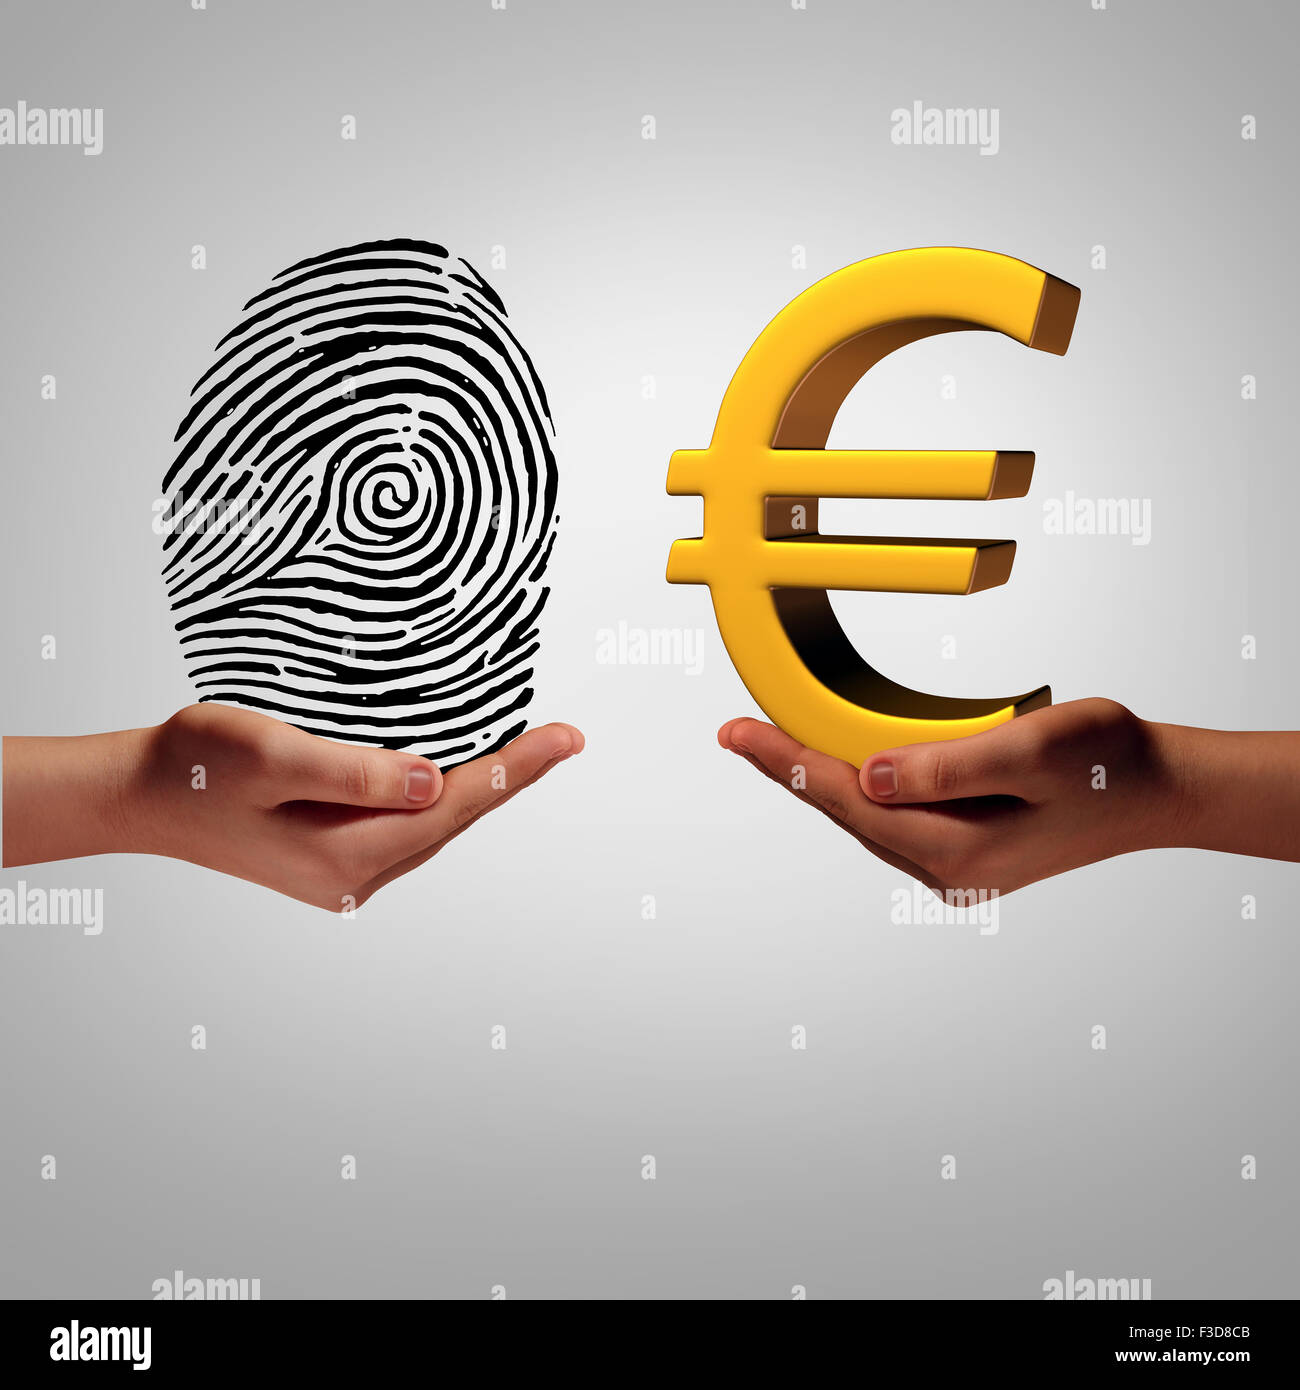 Europe information market and personal data brokering business concept buying and selling european information as a hand holding a finger print and another person with a euro symbol as a metaphor for a security identification access. Stock Photo